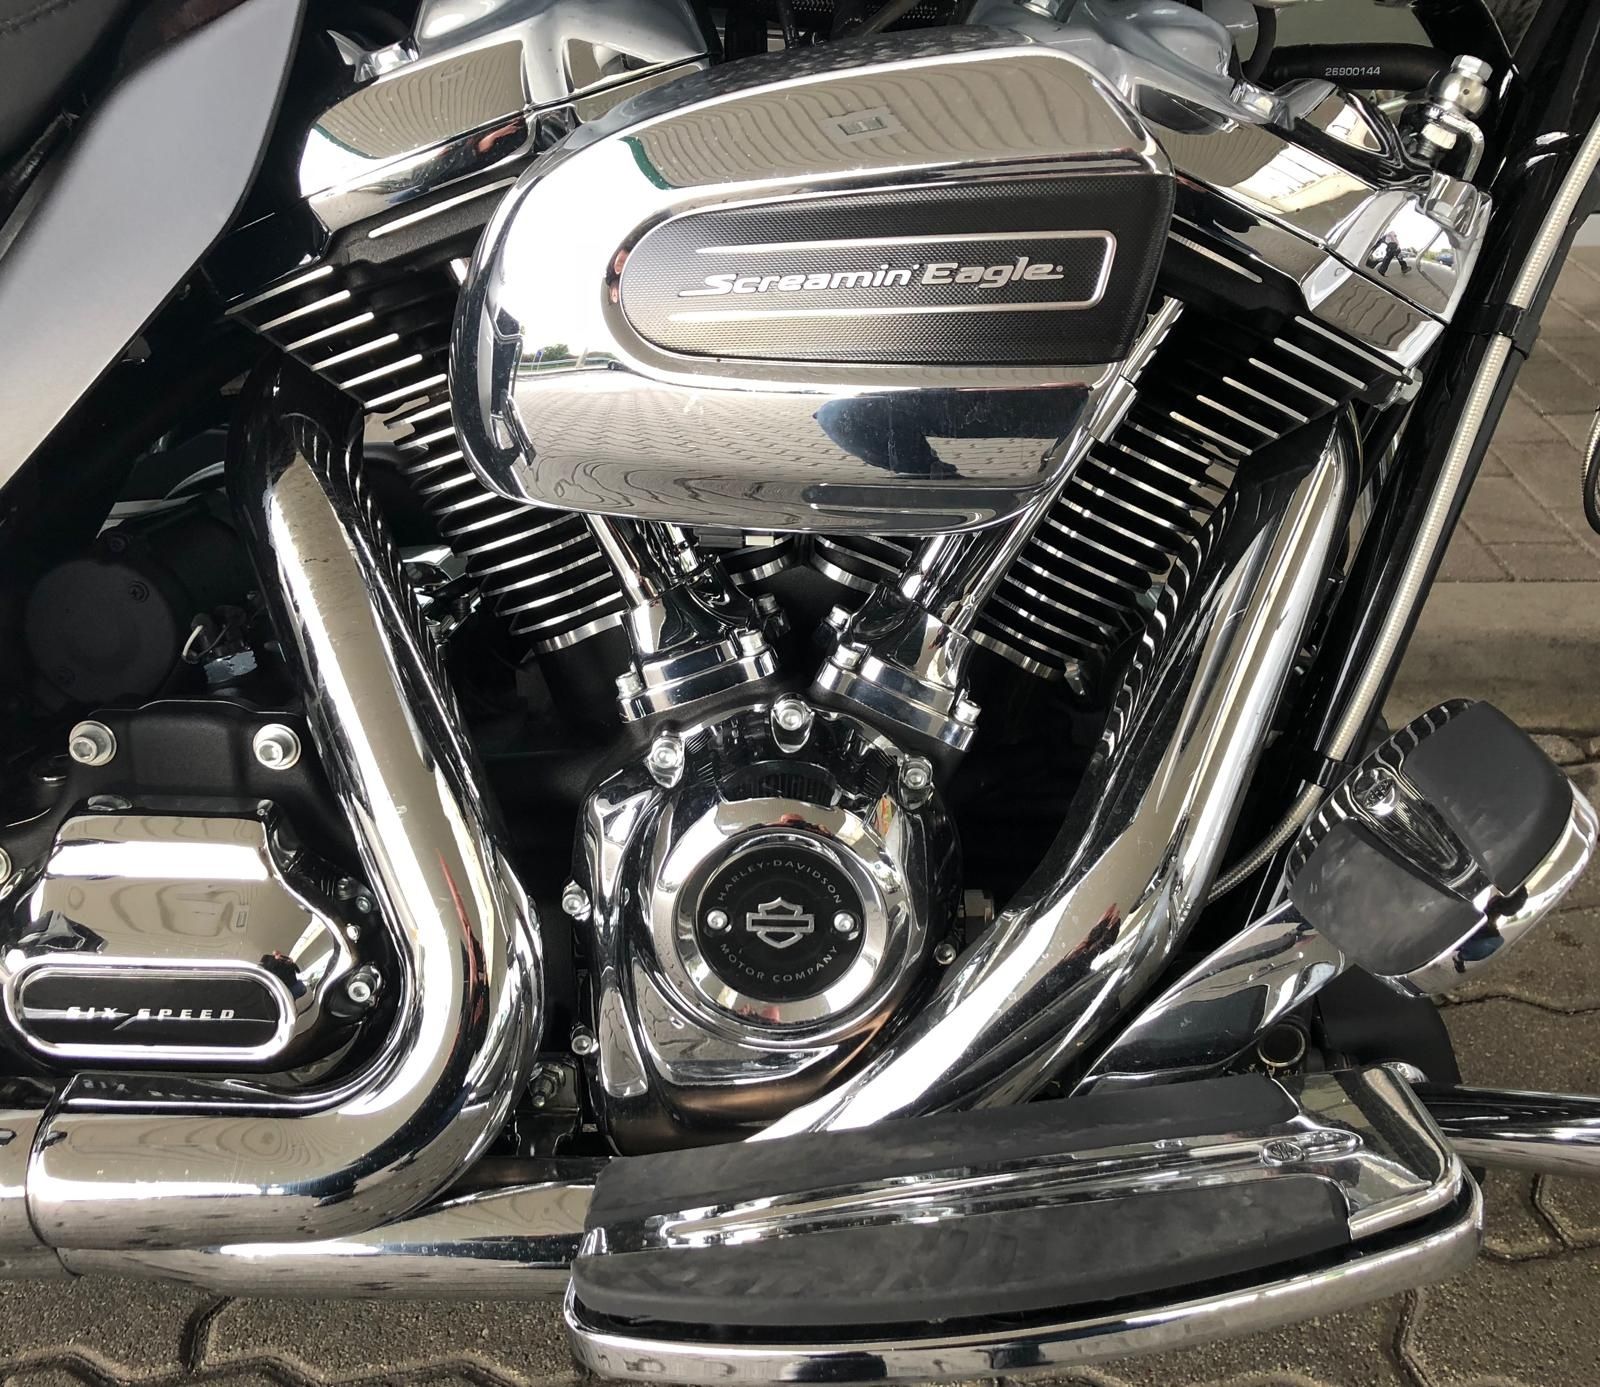 Harley Davidson Road King Classic impecabil